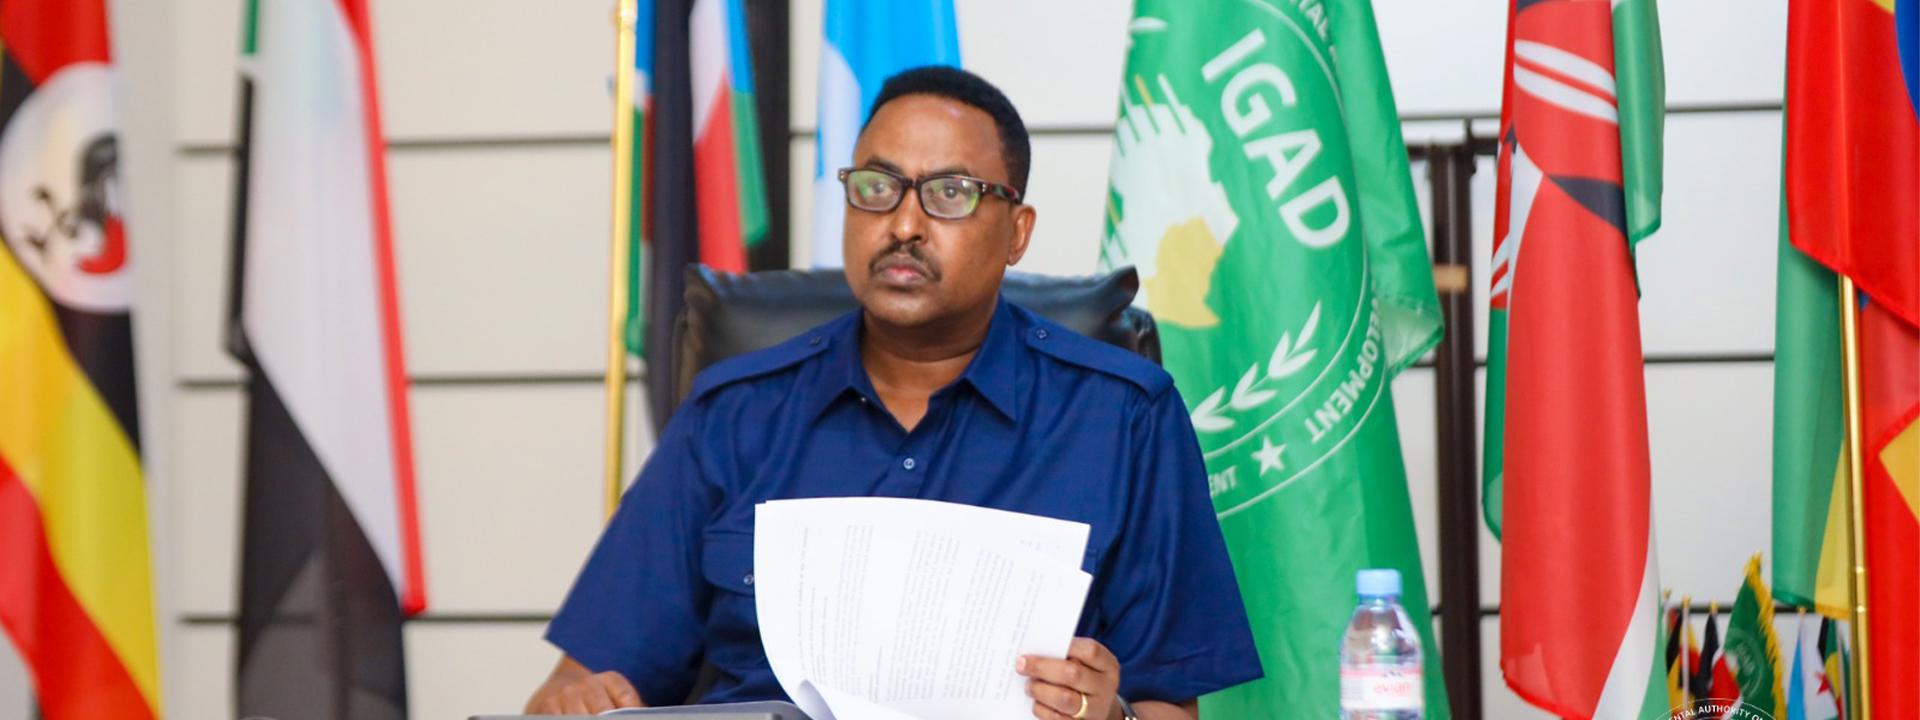 Statement by H.E. Workneh Gebeyehu (PhD), Executive Secretary of IGAD at the 9326th Meeting of the UN Security Council On the Situation in Sudan